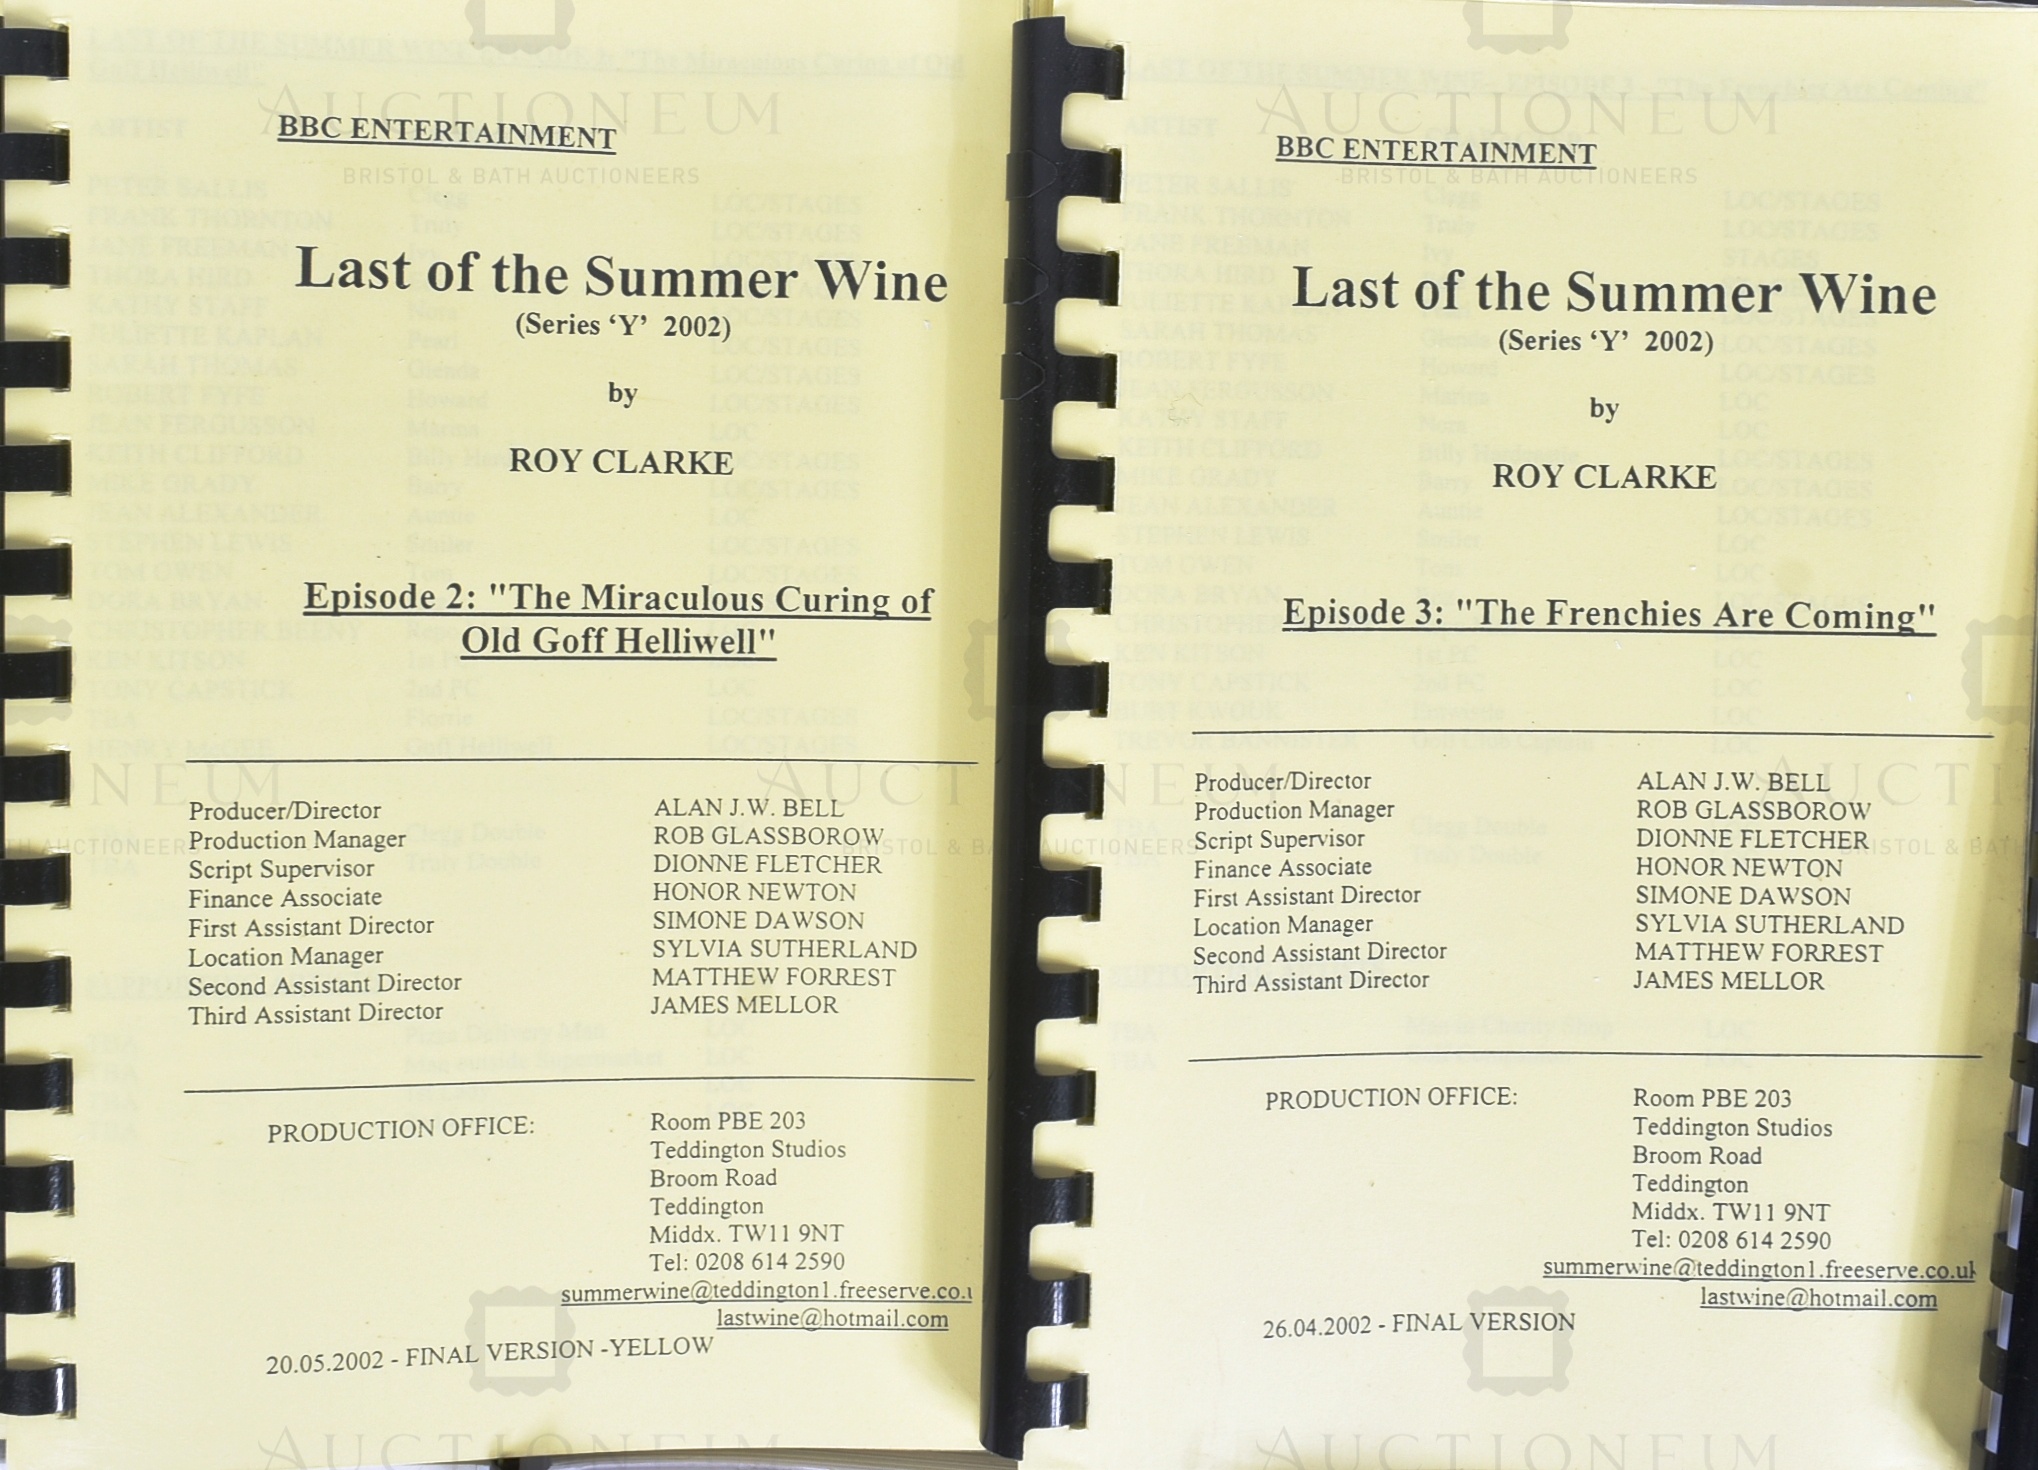 FROM THE ESTATES OF BILL & TOM OWEN - LAST OF THE SUMMER WINE - Image 2 of 5